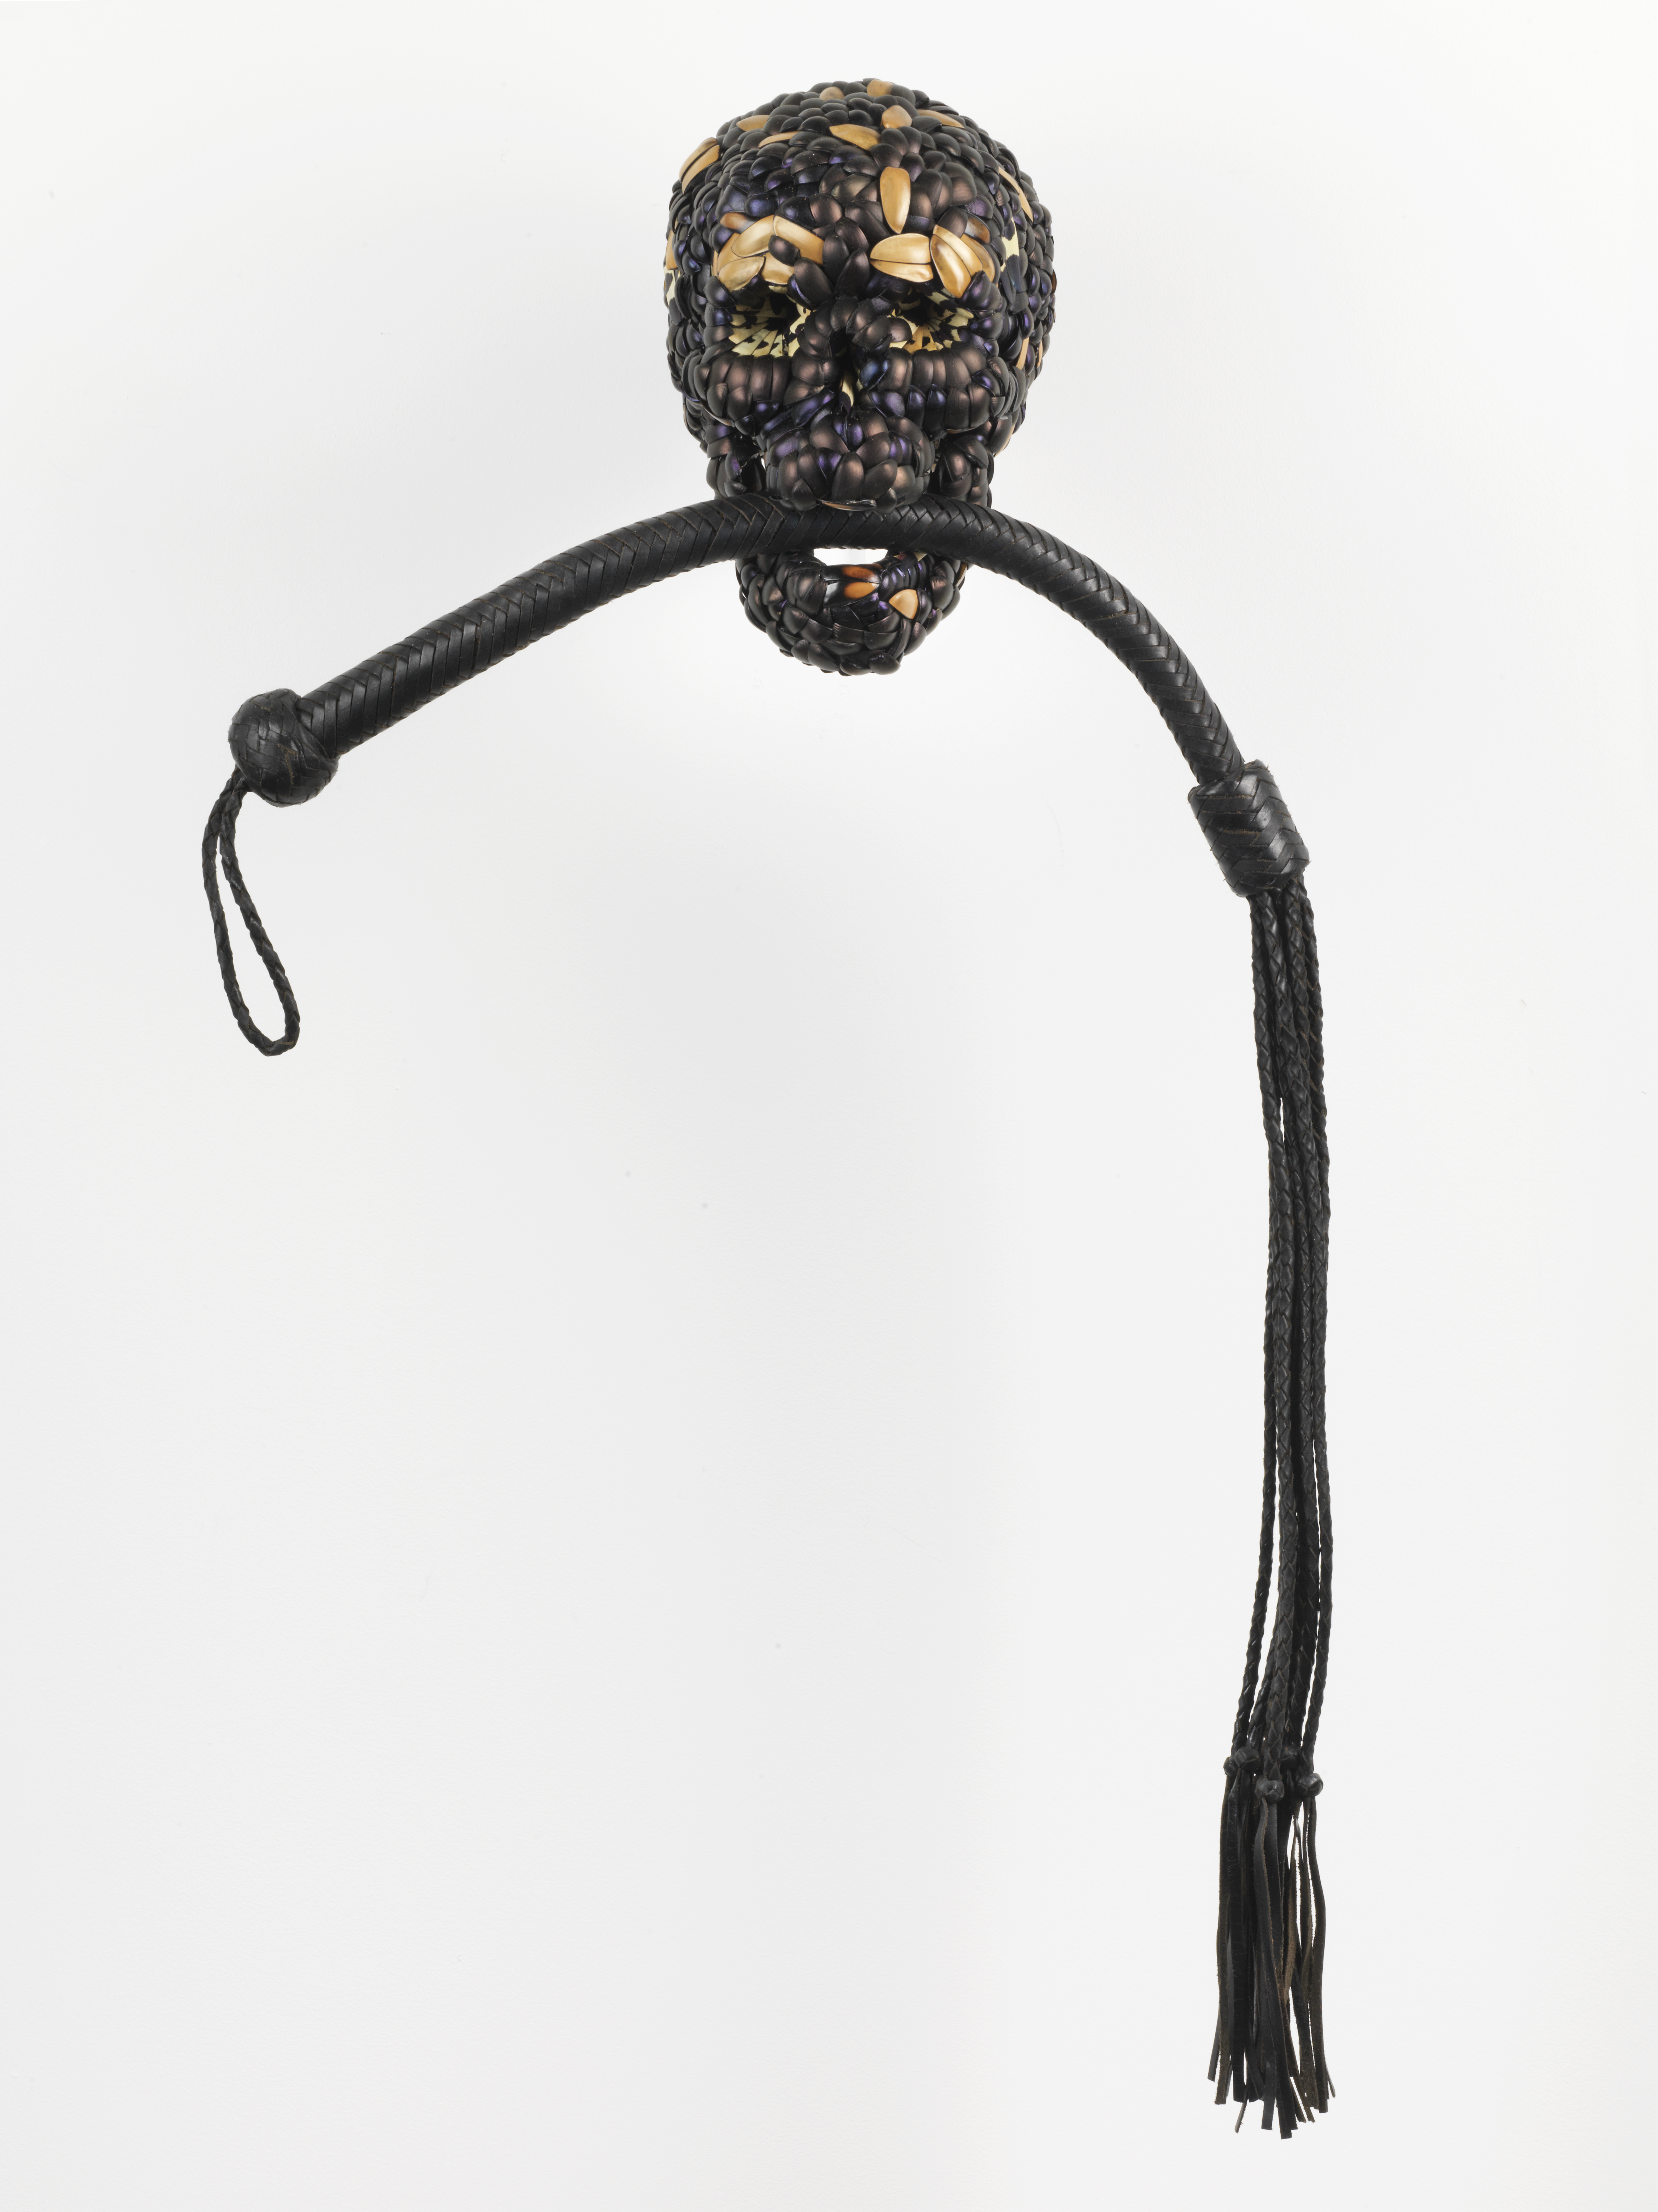 Jan Fabre, Skull with Whip, 2013, mixture of jewel beetle wing-cases, polymers, leather, 90 x 49 x 22 cm